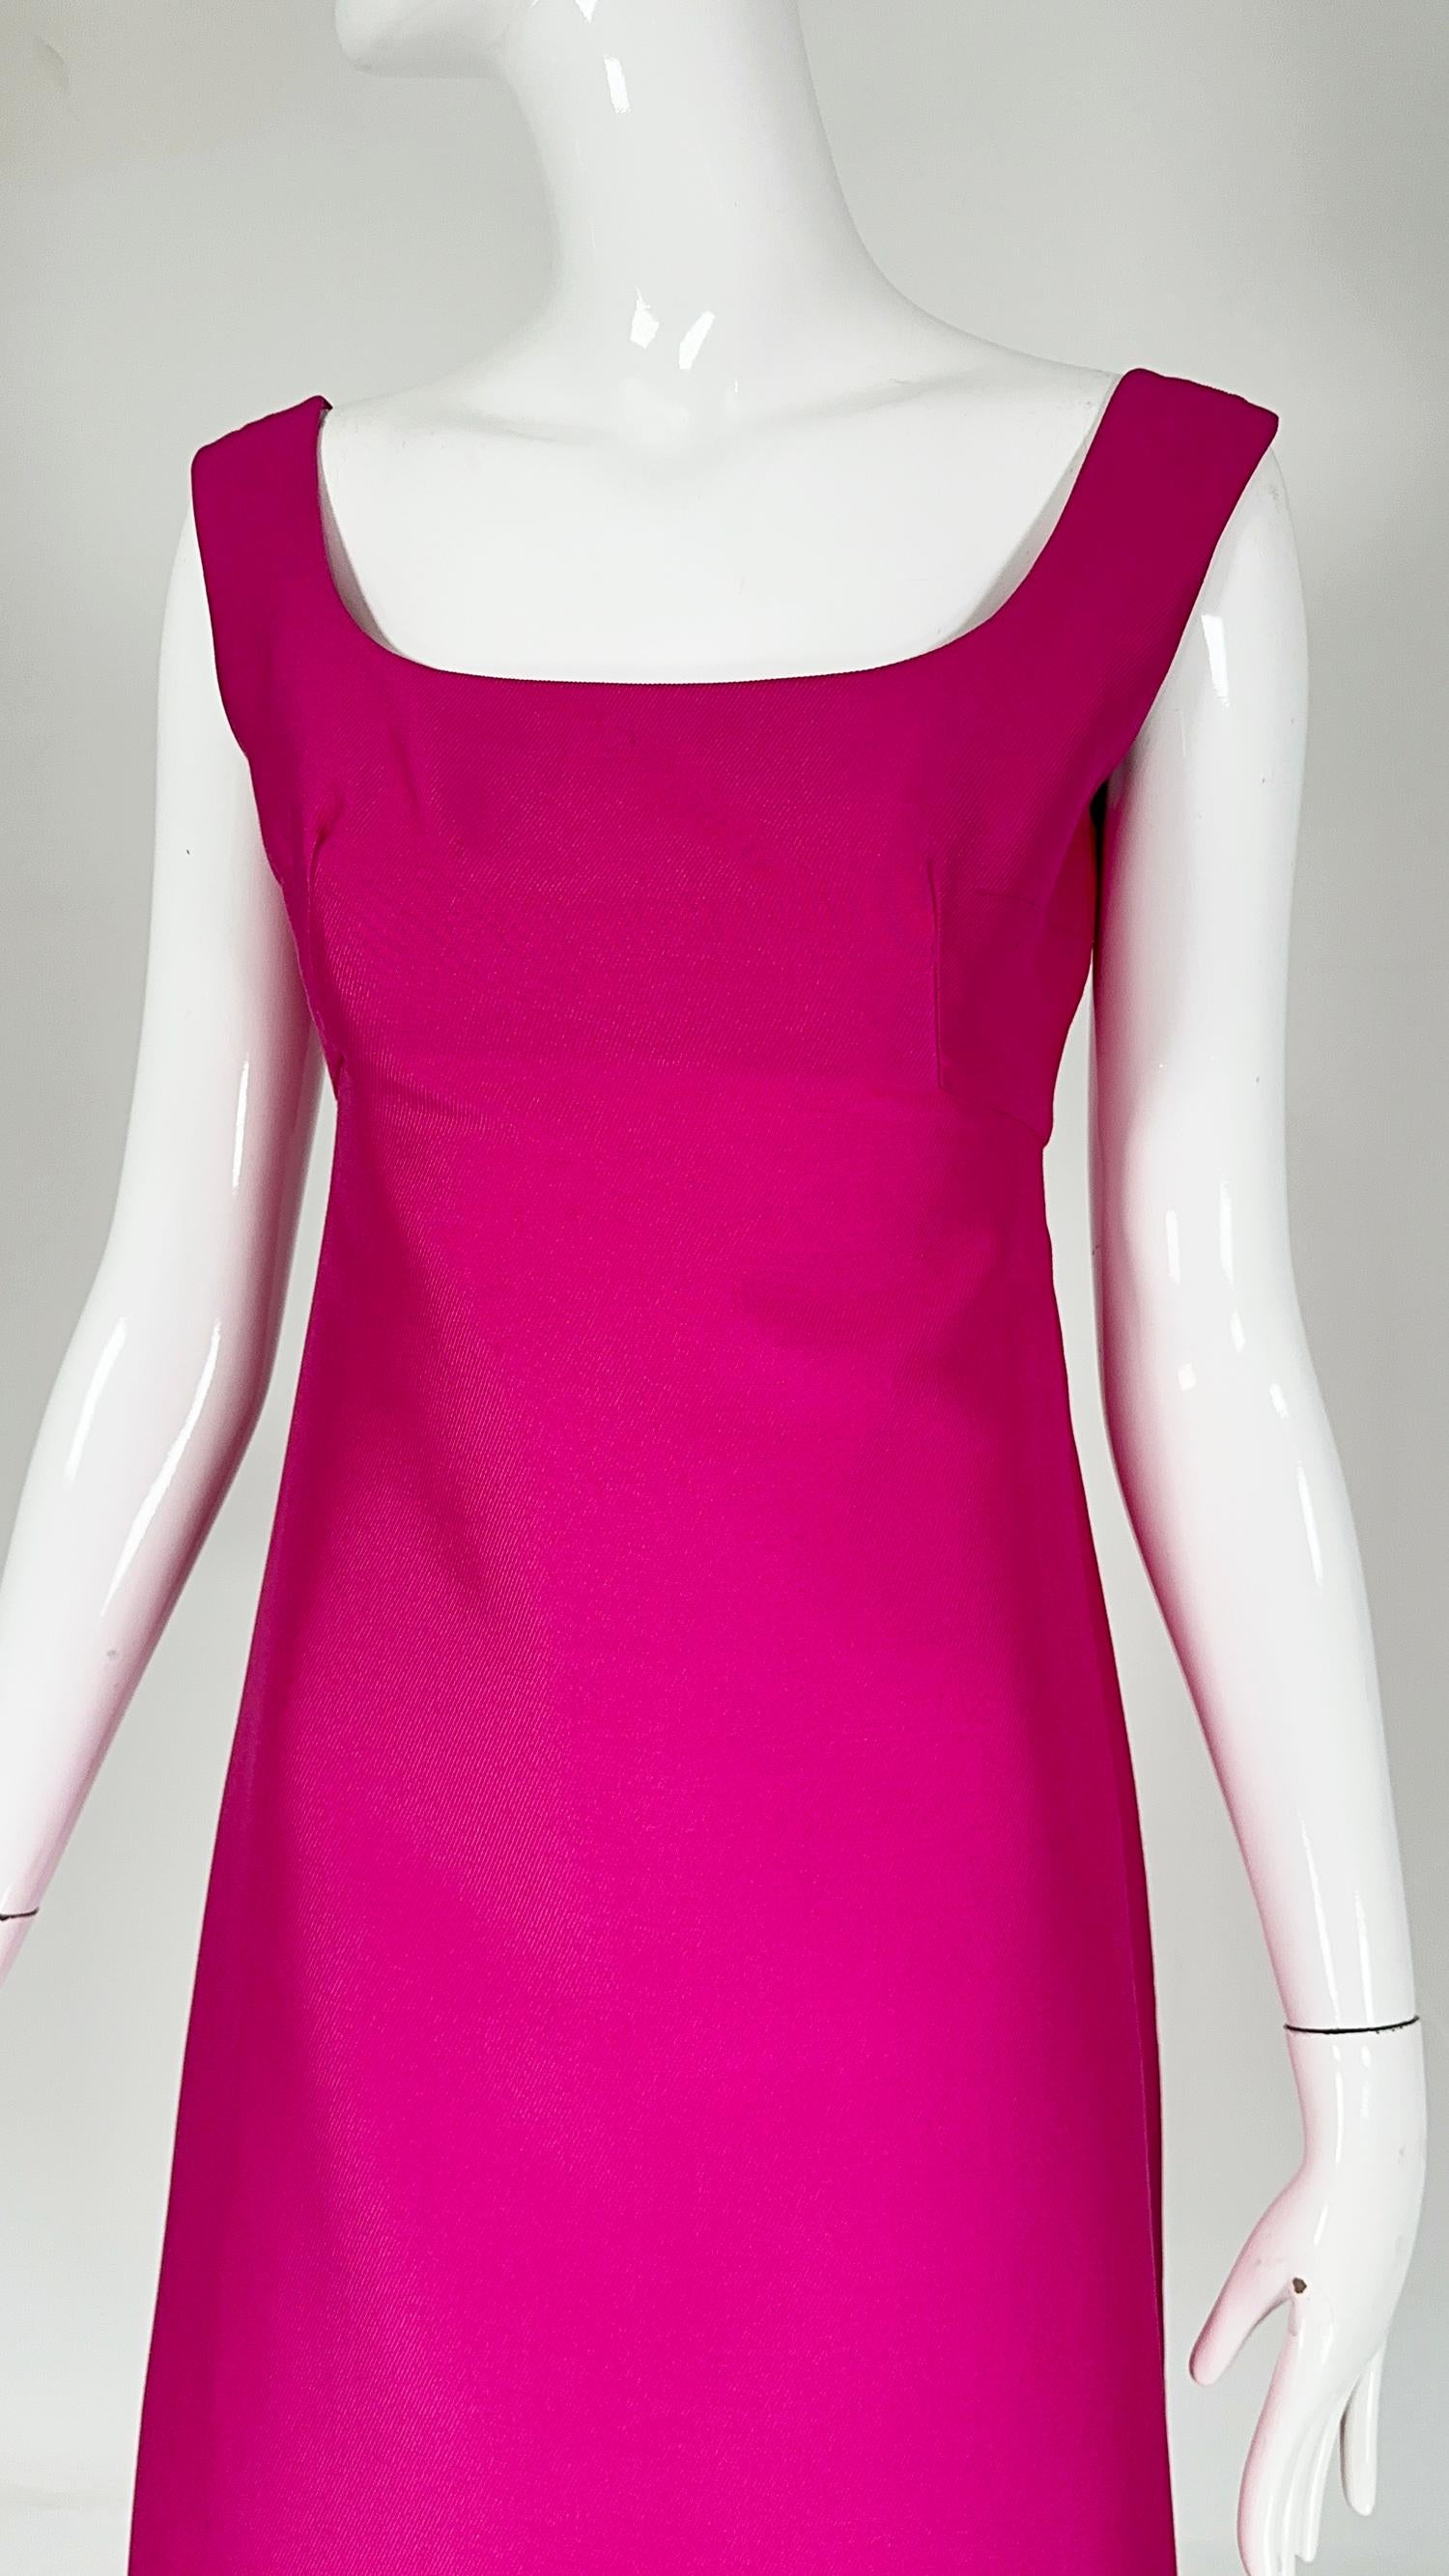 Malcolm Starr Fuchsia Pink Silk Twill Evening Dress Early 1960s For Sale 6